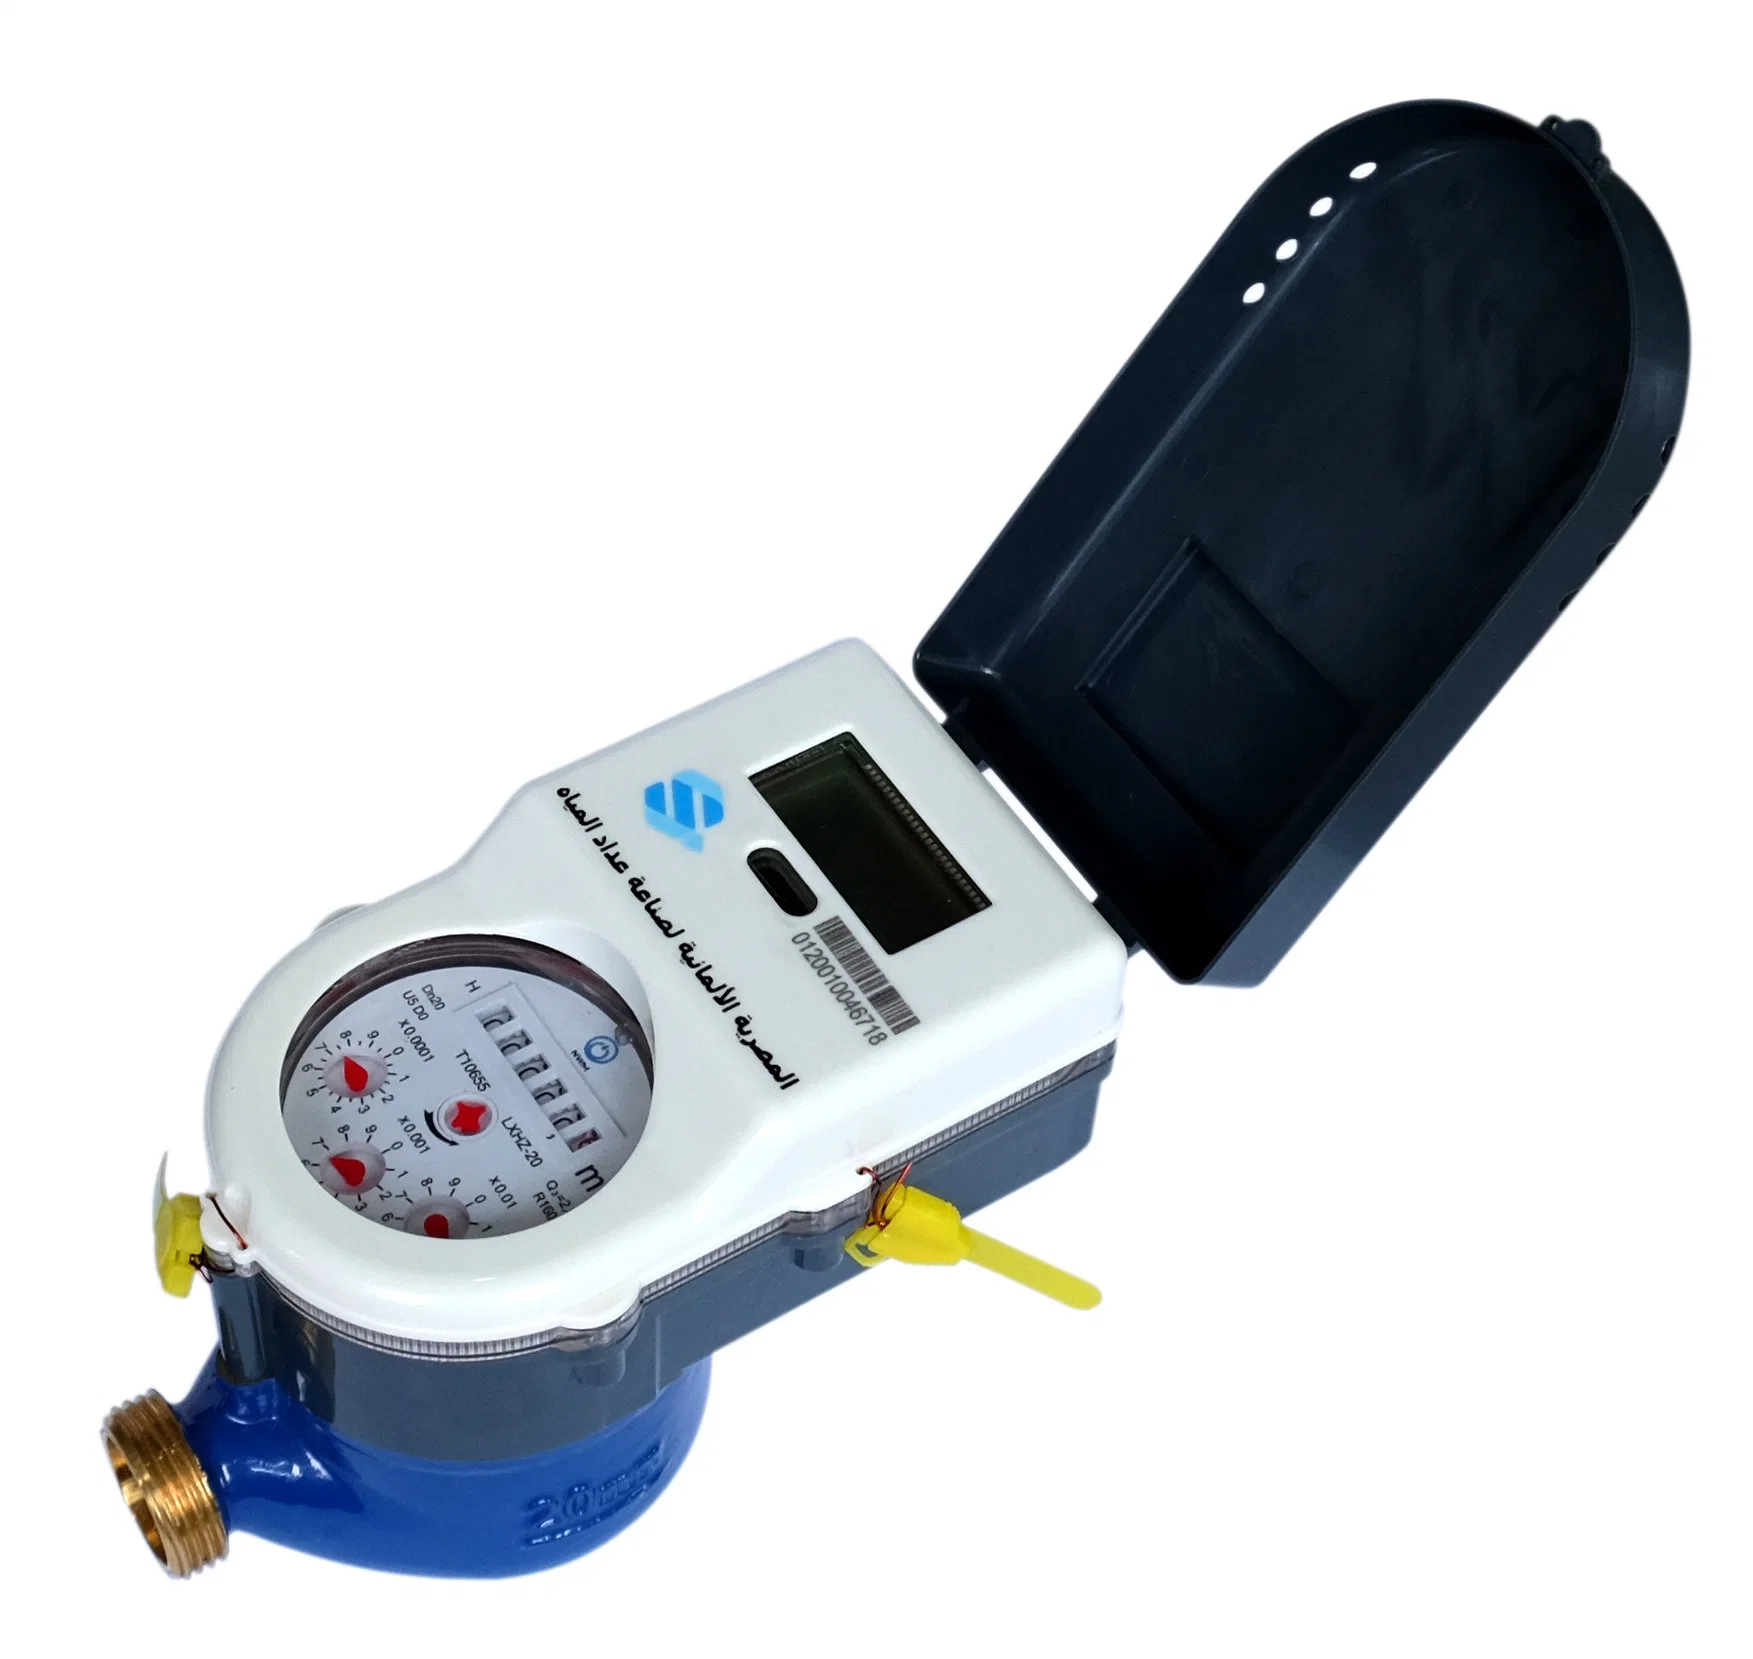 Prepaid Valve Control Water Meter with AMR Application